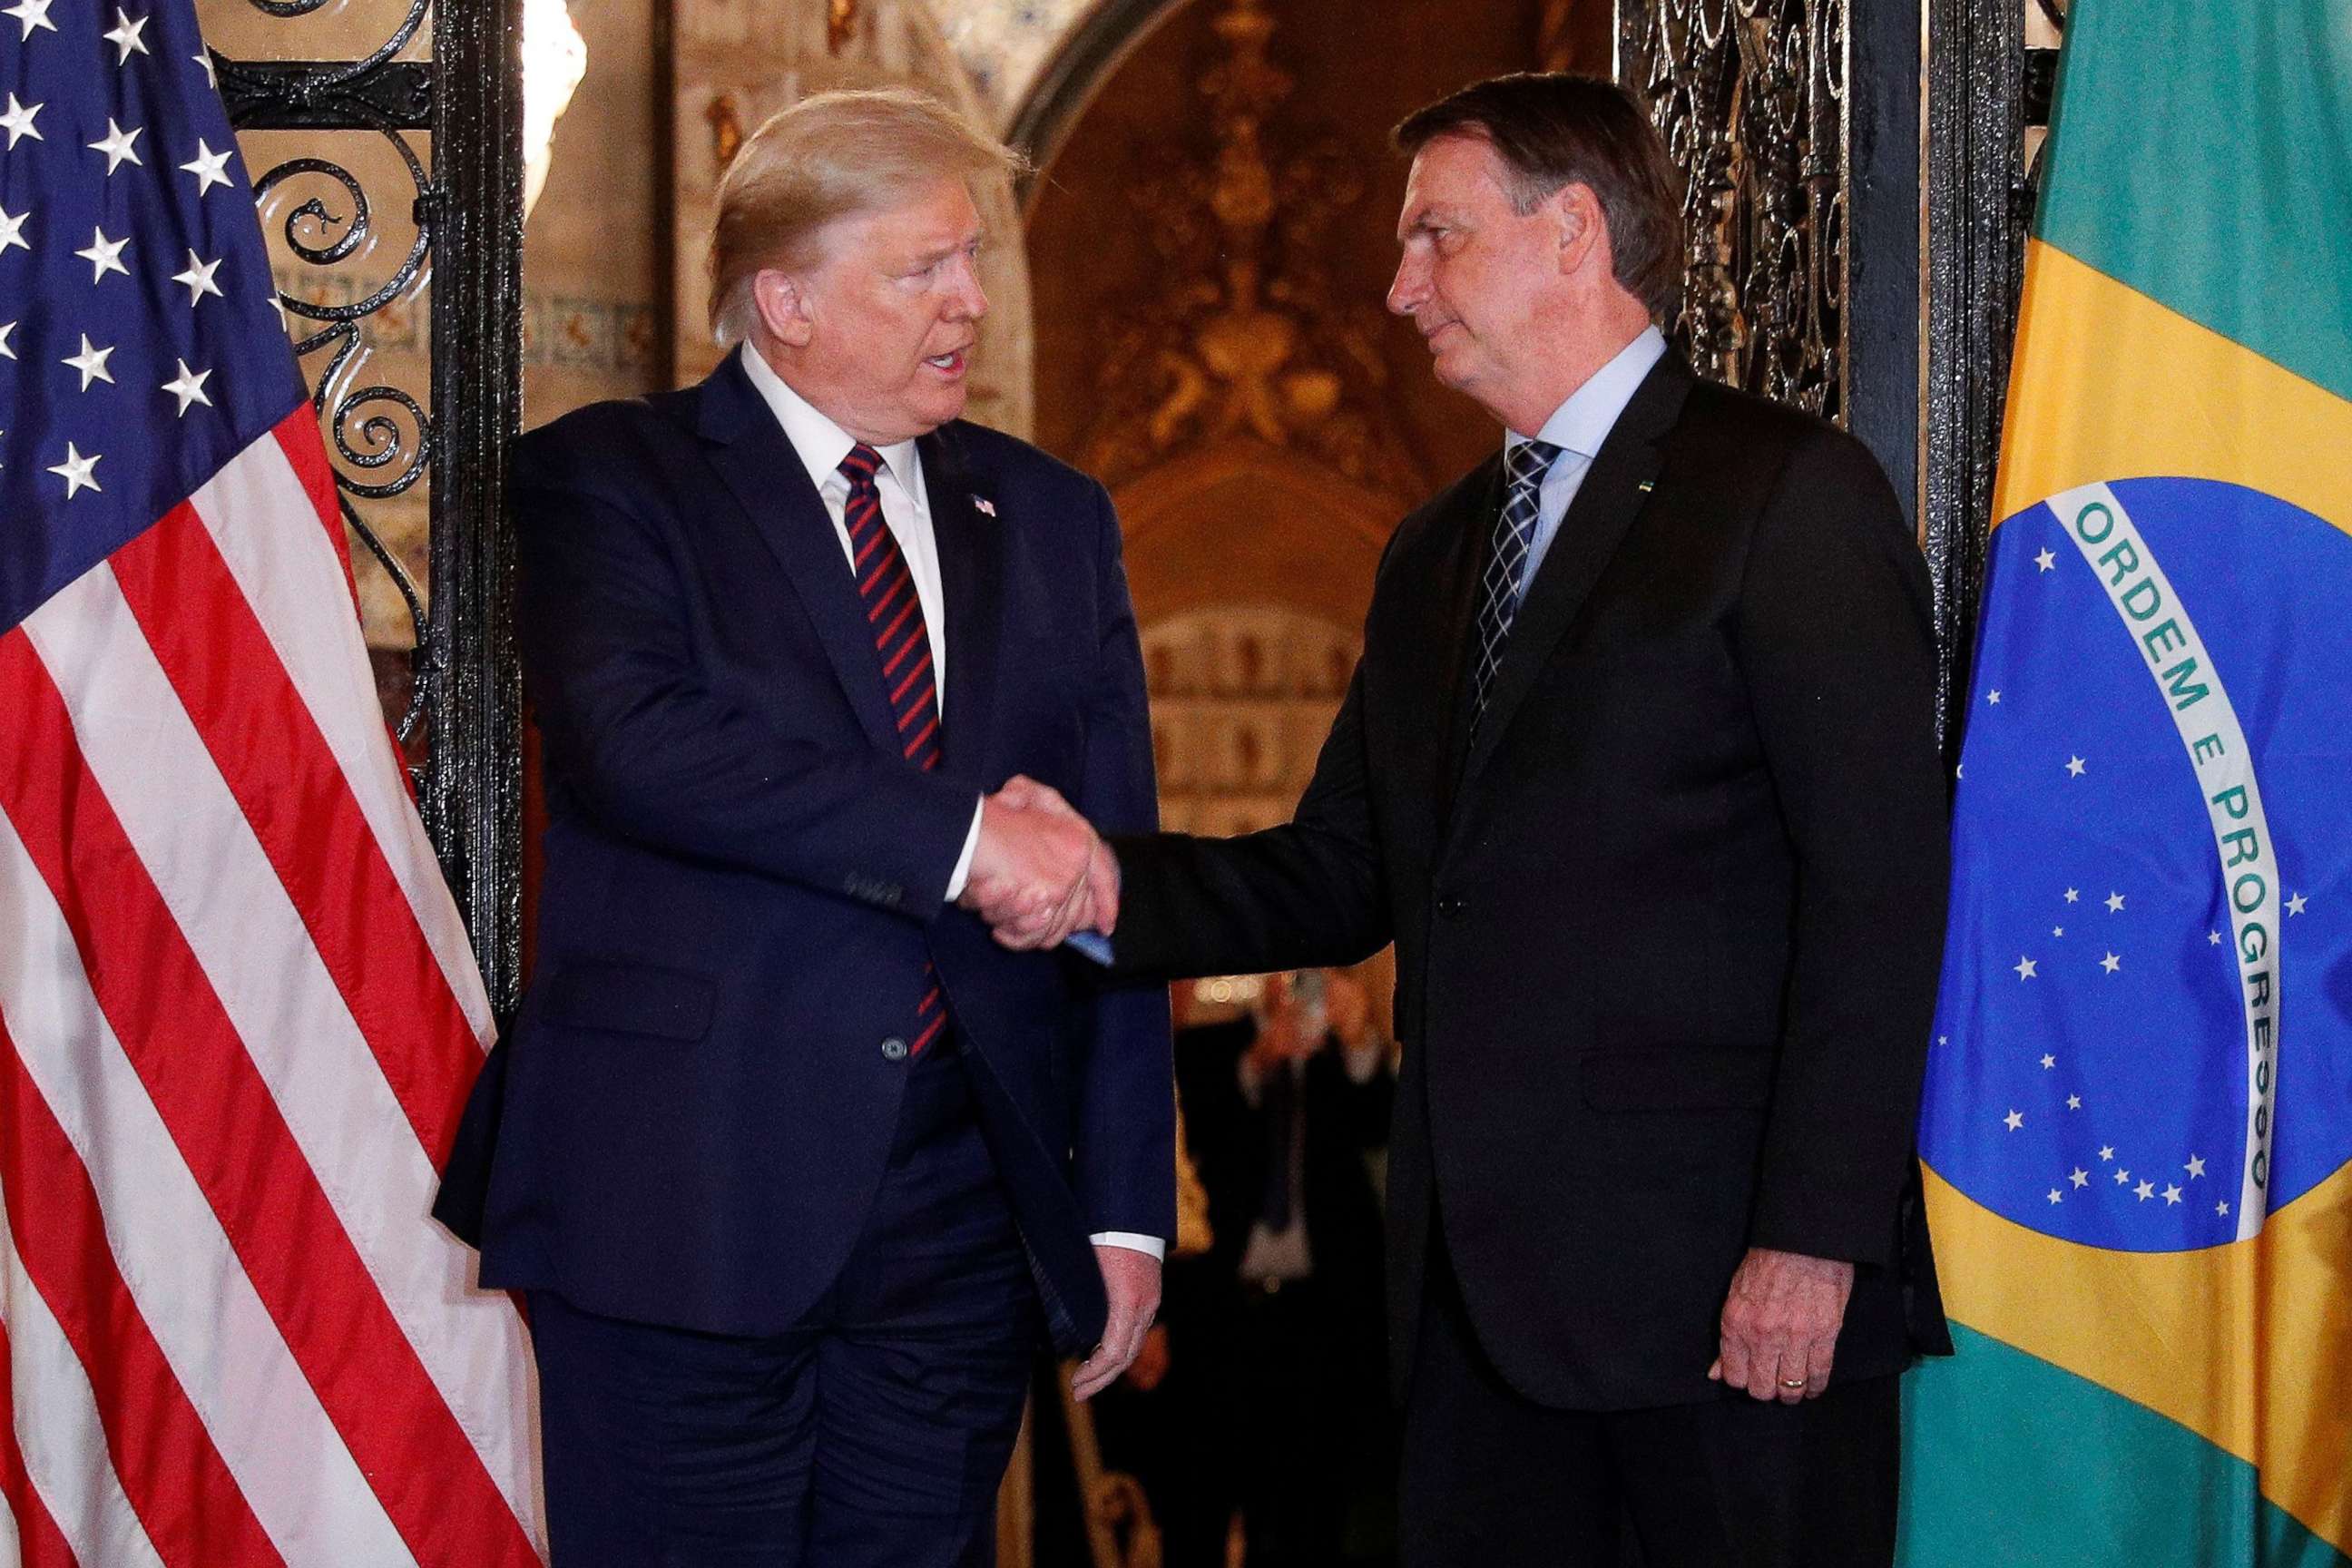 PHOTO: President Donald Trump shakes hands with Brazilian President Jair Bolsonaro before attending a working dinner at the Mar-a-Lago resort in Palm Beach, Fla., March 7, 2020. 